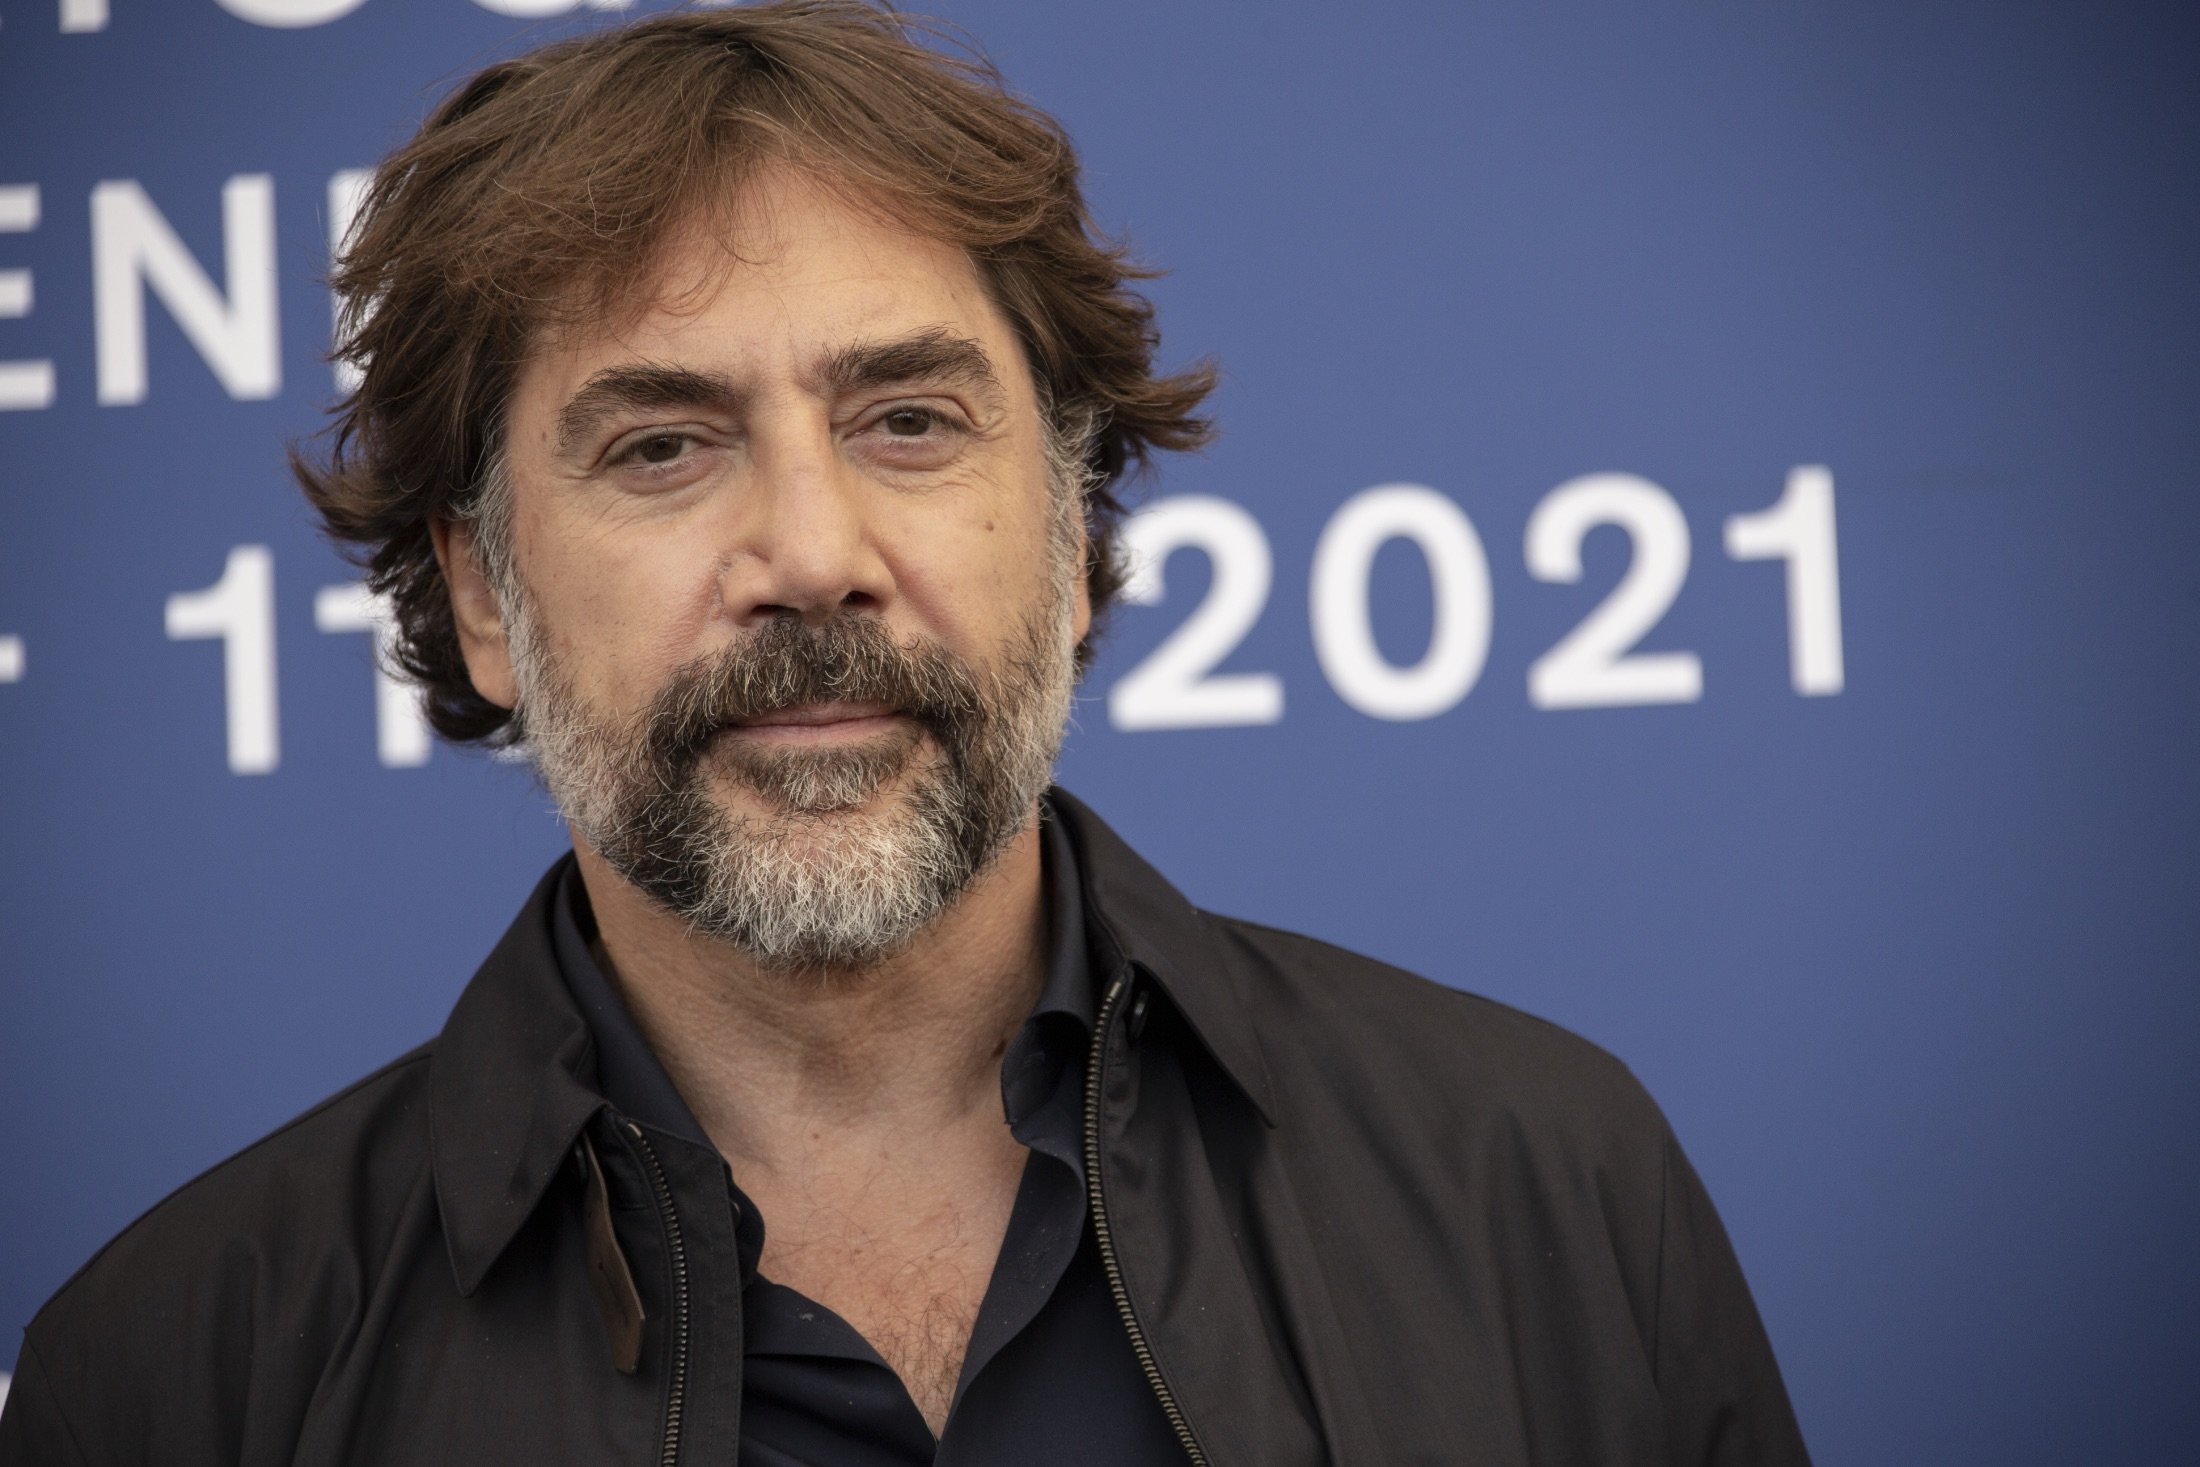 Javier Bardem poses for photographers at the photocell for the film “Dune” at the 78th Venice Film Festival, in Venice, Italy, Sept. 3, 2021. (AP Photo)